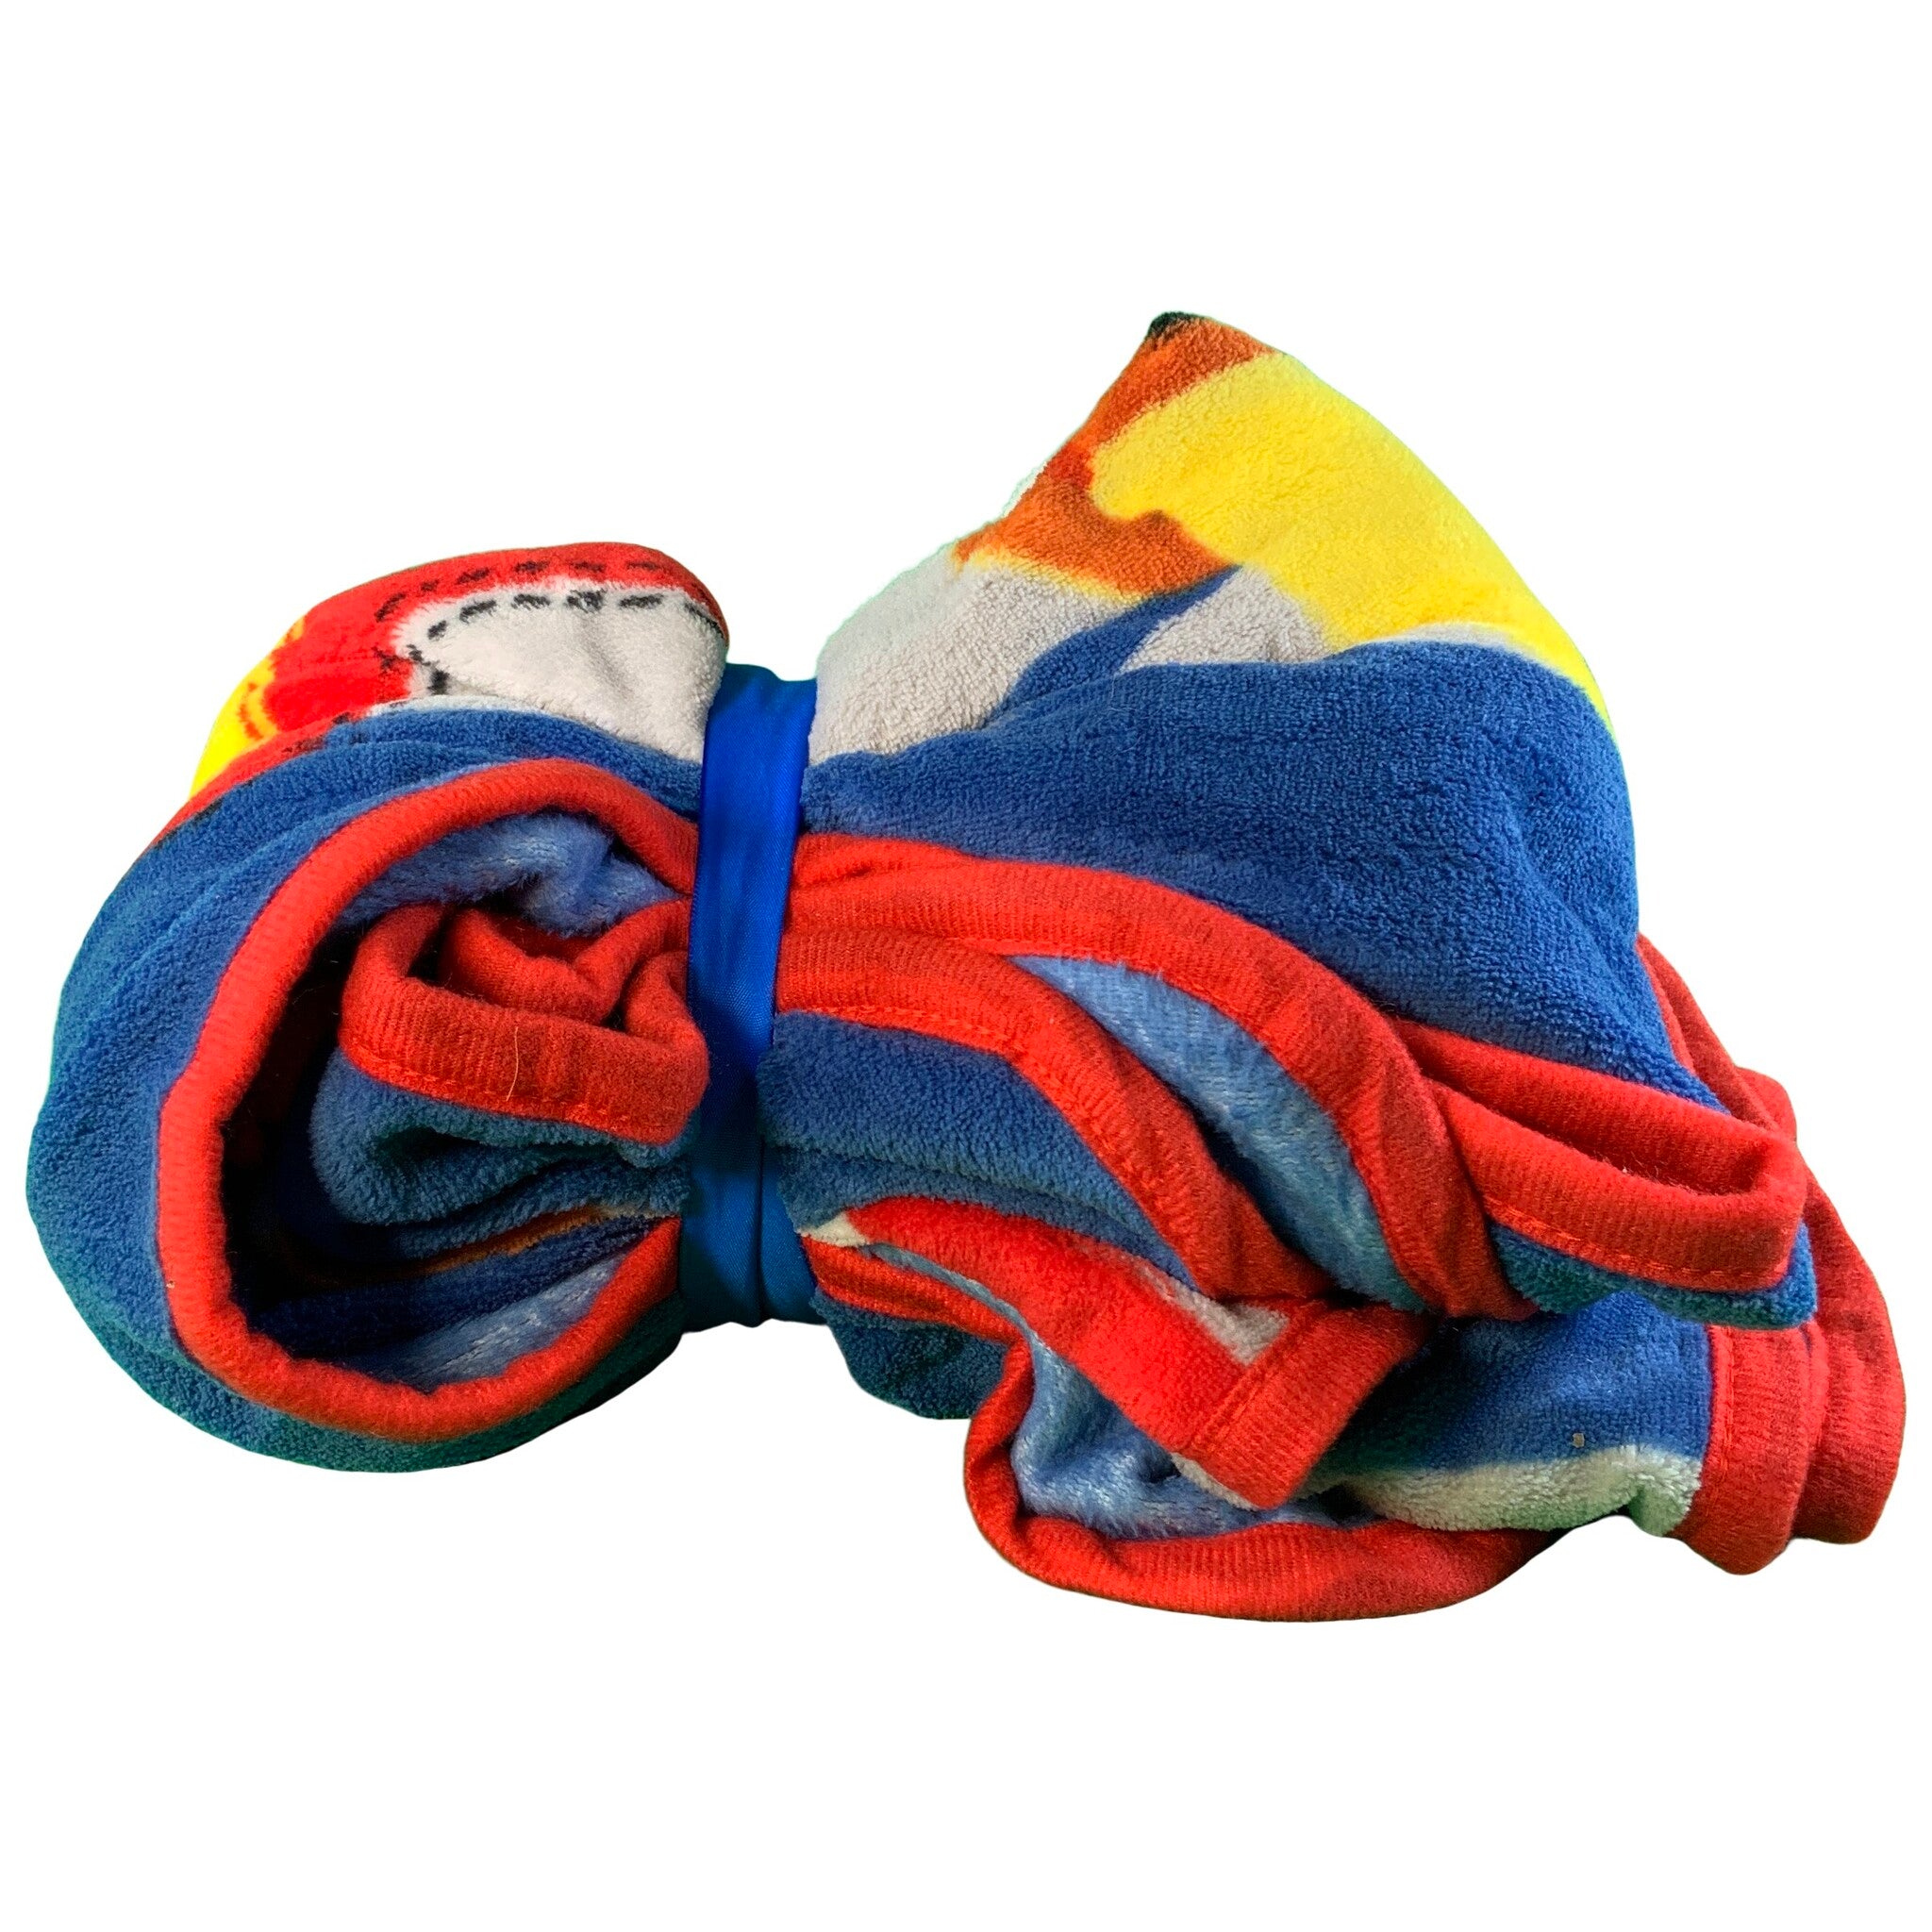 Save on Paw 40" X 50" Silky Soft Throw Feat. Chase, Marshall & Rubble - Nickelodeon | Returns USA